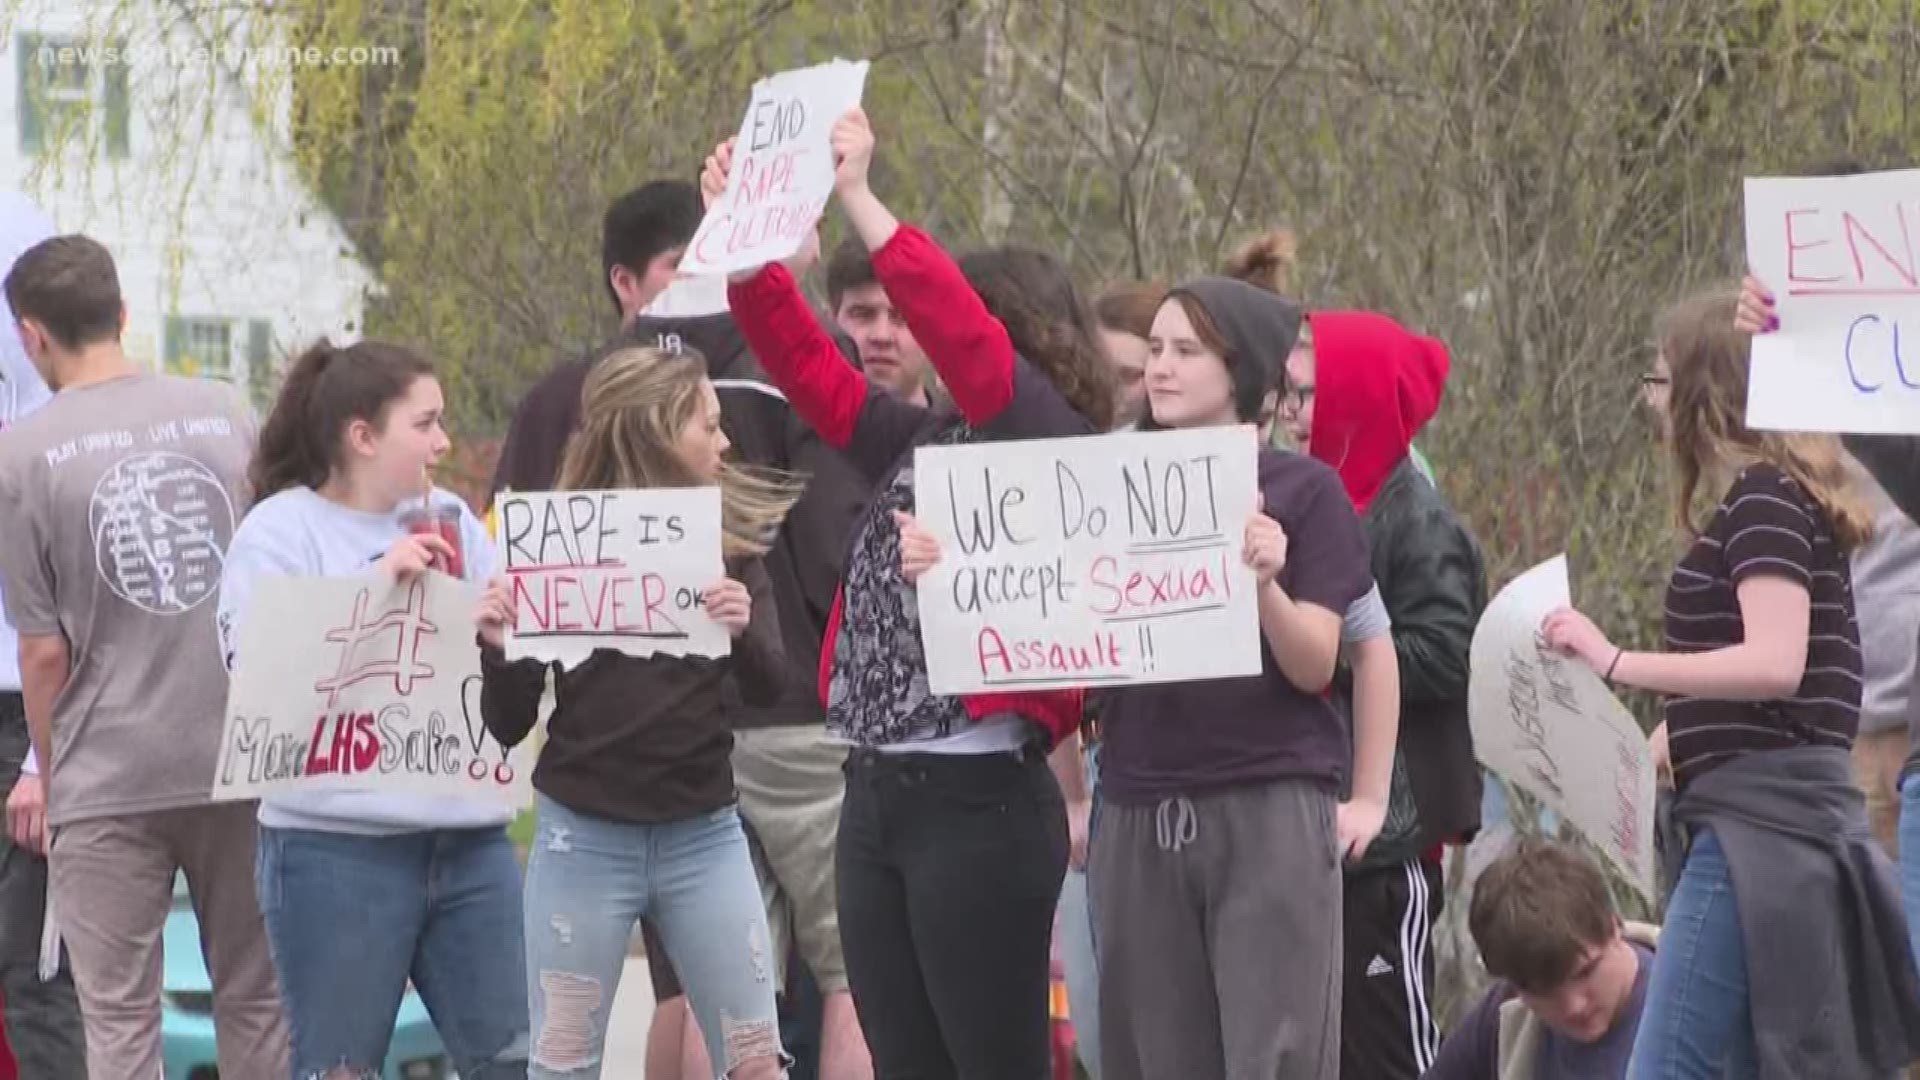 Dozens of Lisbon High School students rallied on Tuesday after a fellow student says she was raped last month.